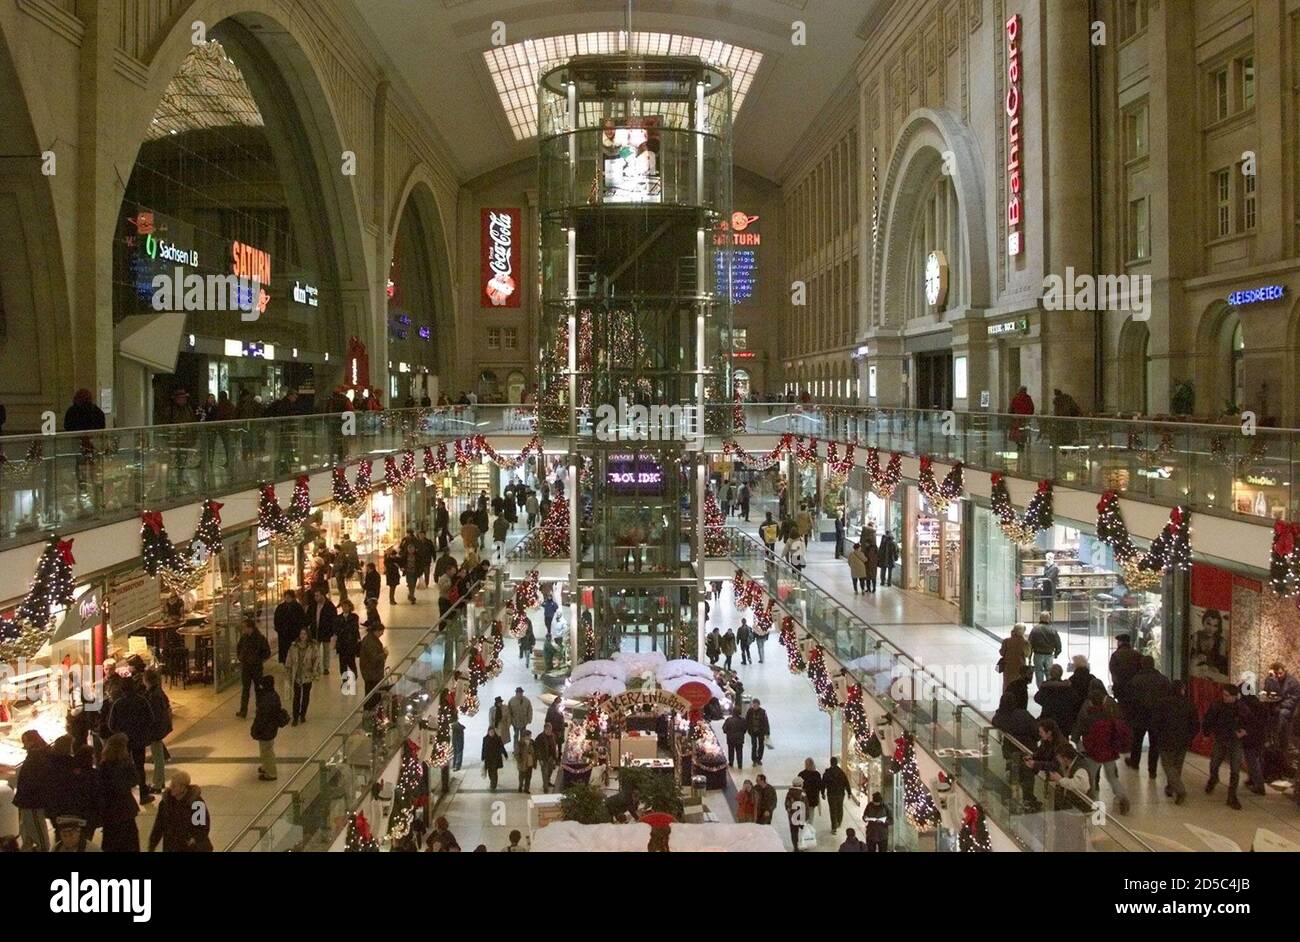 People shop at a shopping mall inside Leipzig's main station late December  2. The shopping center offers 140 shops, restaurants and boutiques. Despite  Germany's trading laws which close down shopping centers in